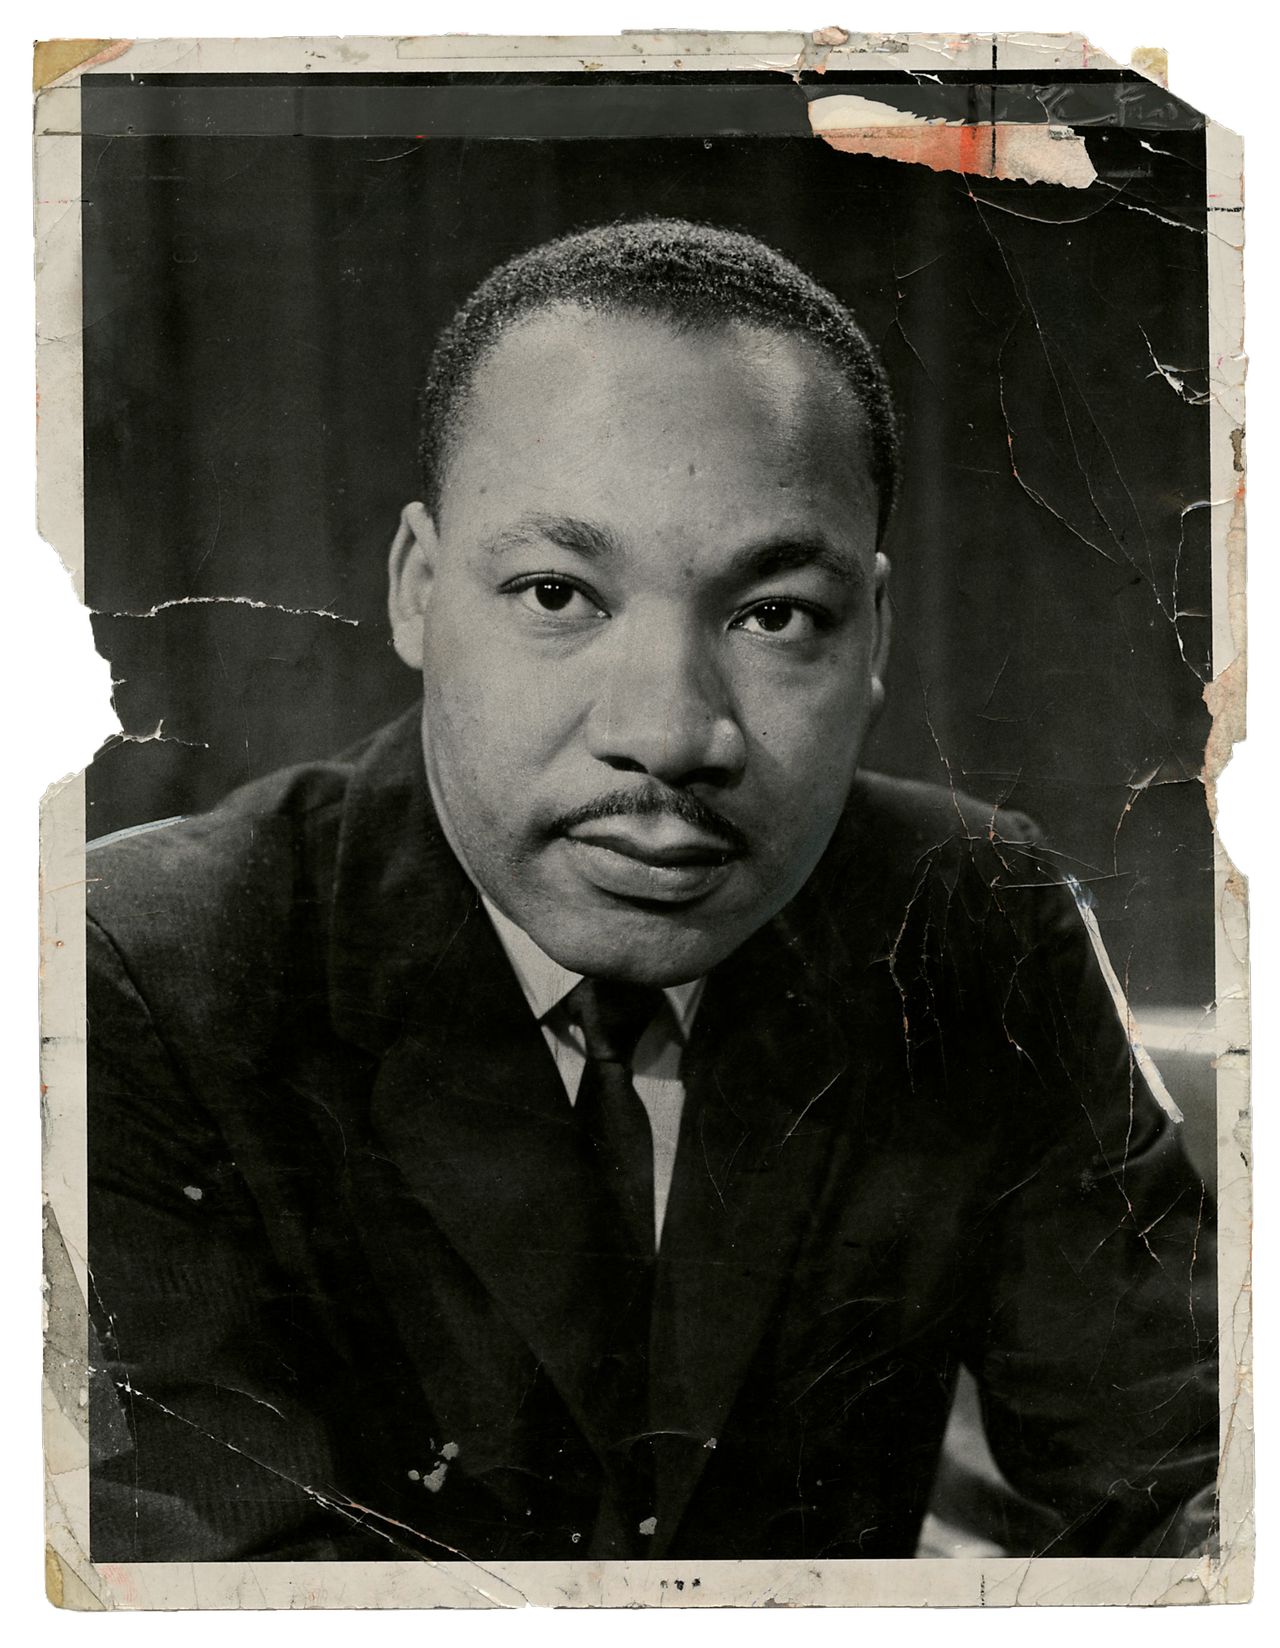 1963: An iconic portrait of the Rev. Dr. Martin Luther King Jr. was more or less shot from the hip. Allyn Baum snapped this photograph at a taping for a televised round table discussion that aired on NBC. You’d never guess, but Dr. King, looking past the viewer with a gaze for the ages, was seated at a table with four other panelists.